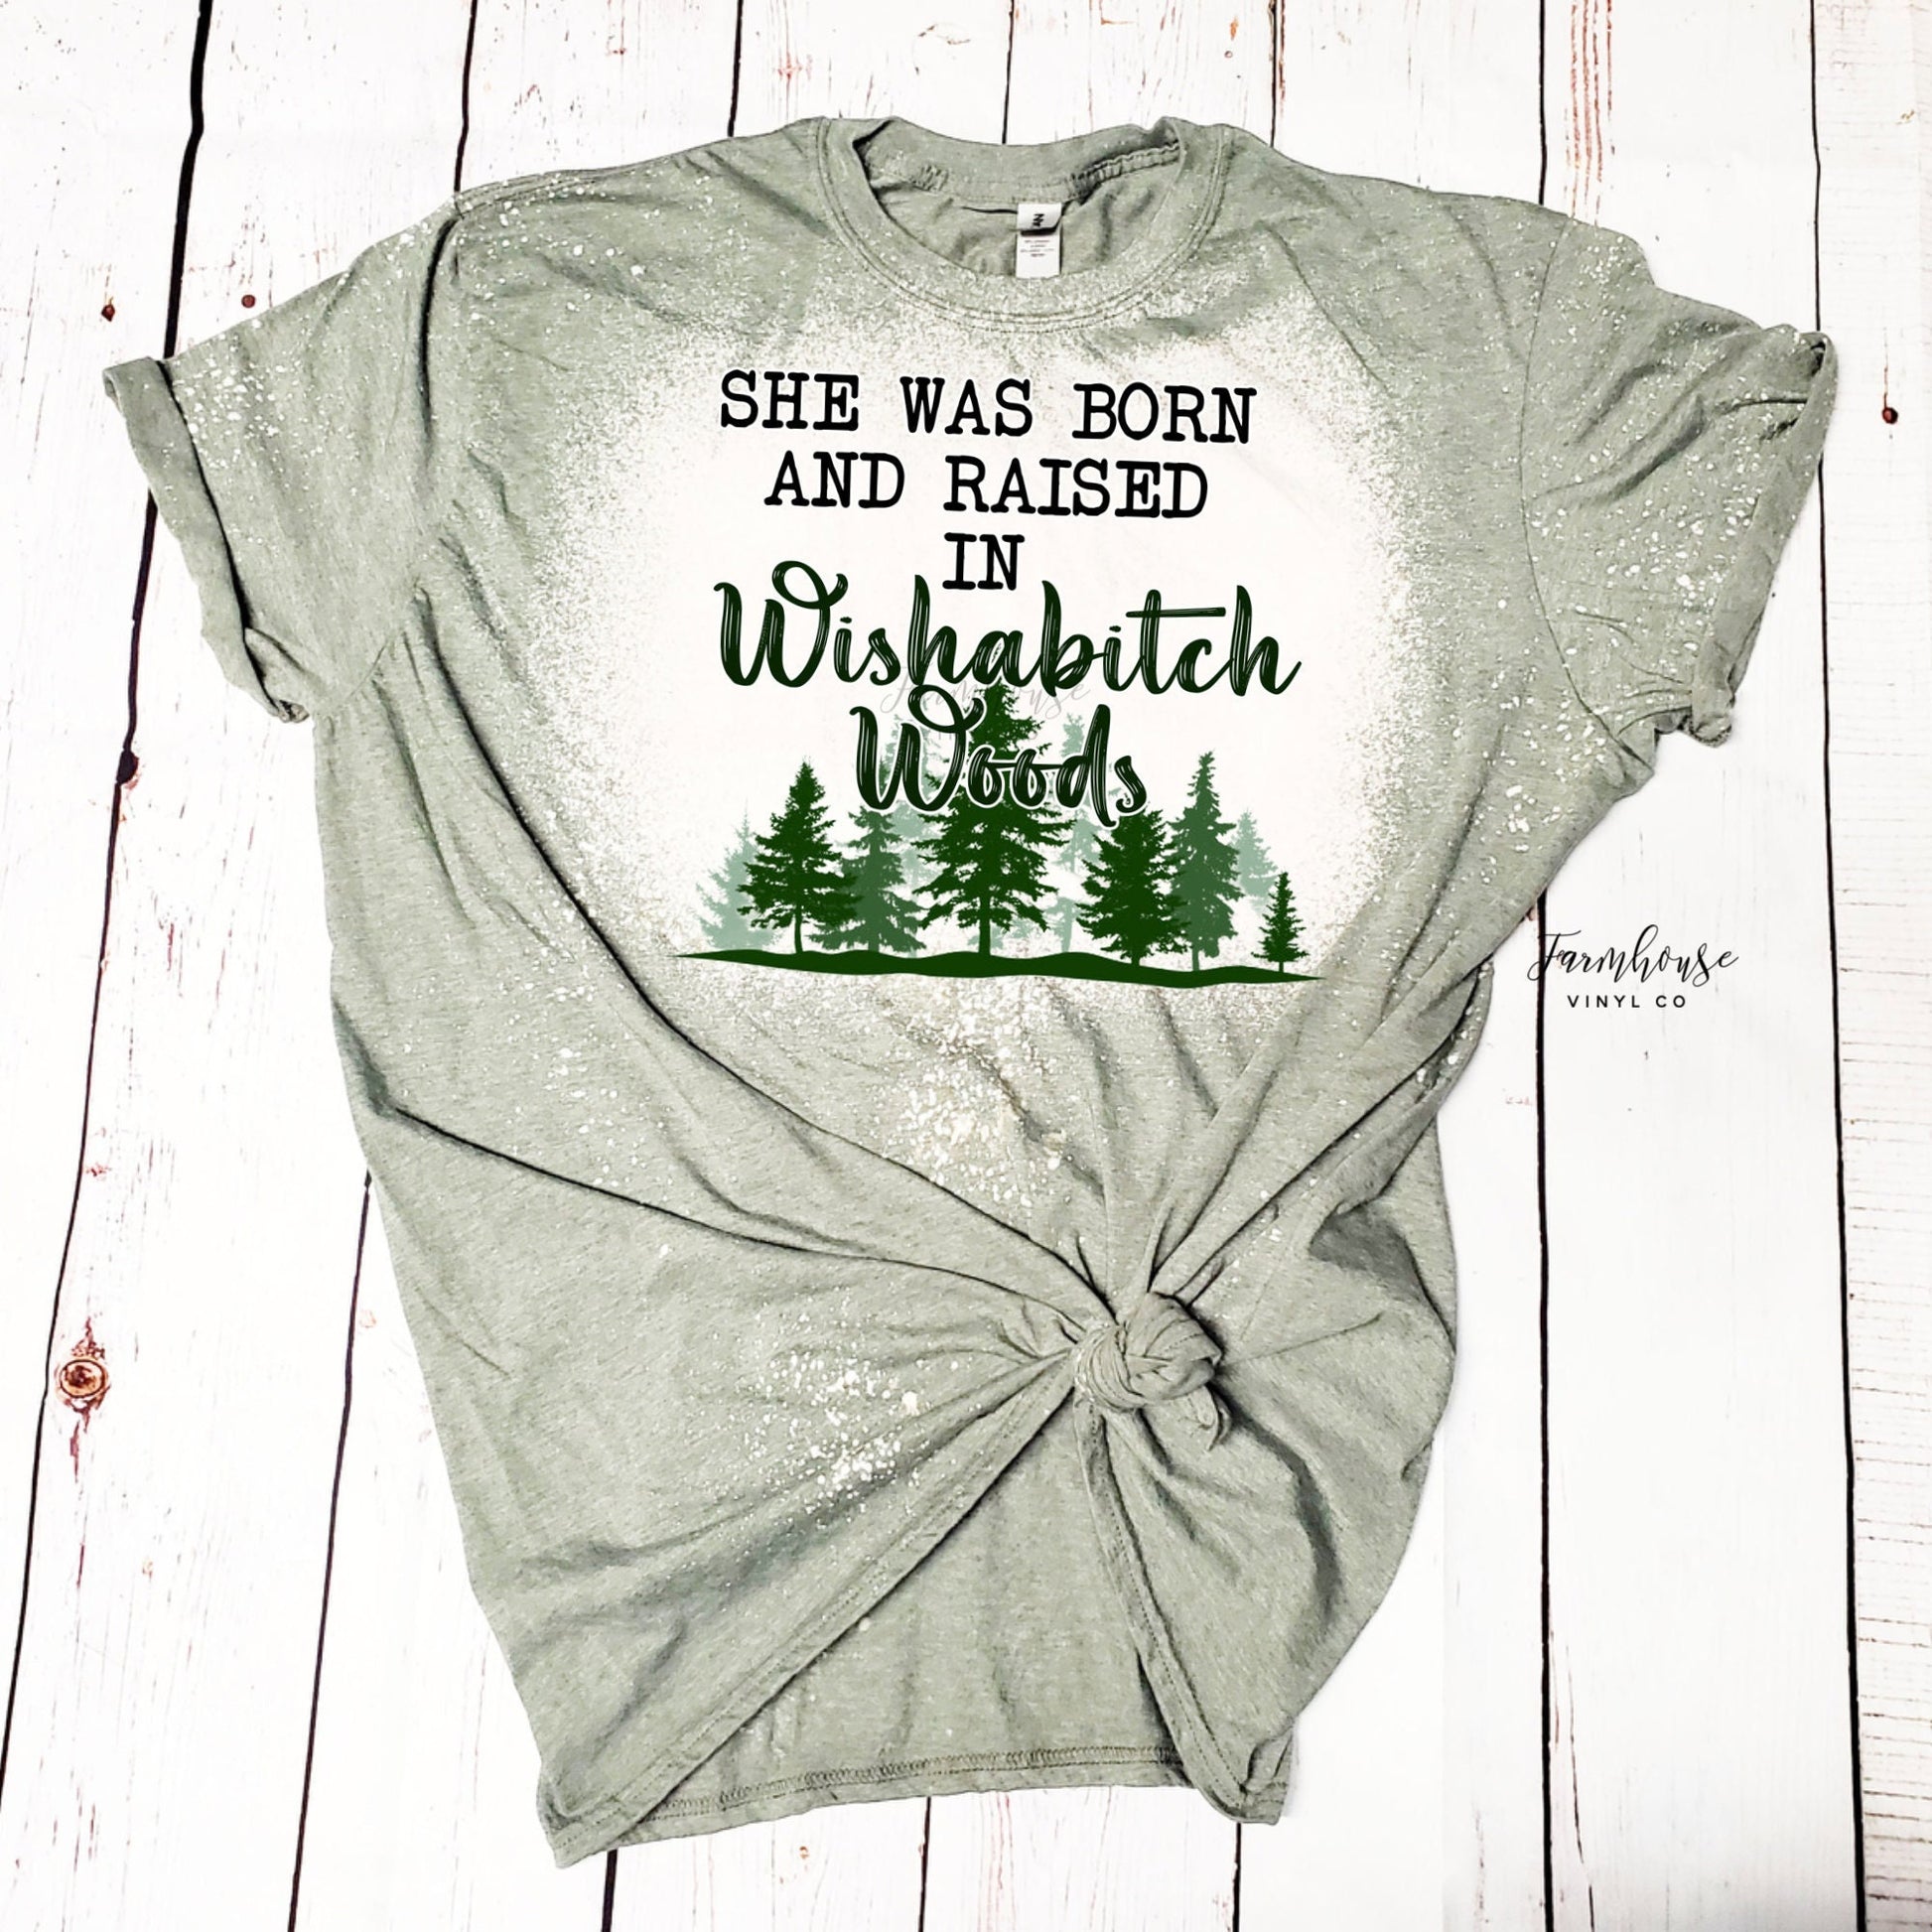 Mature She Was Born and Raised in Wishabitch Woods Bleached Shirt / Trendy shirt / Funny Sarcastic Tee / Bleached Shirt / Wish a B Would - Farmhouse Vinyl Co